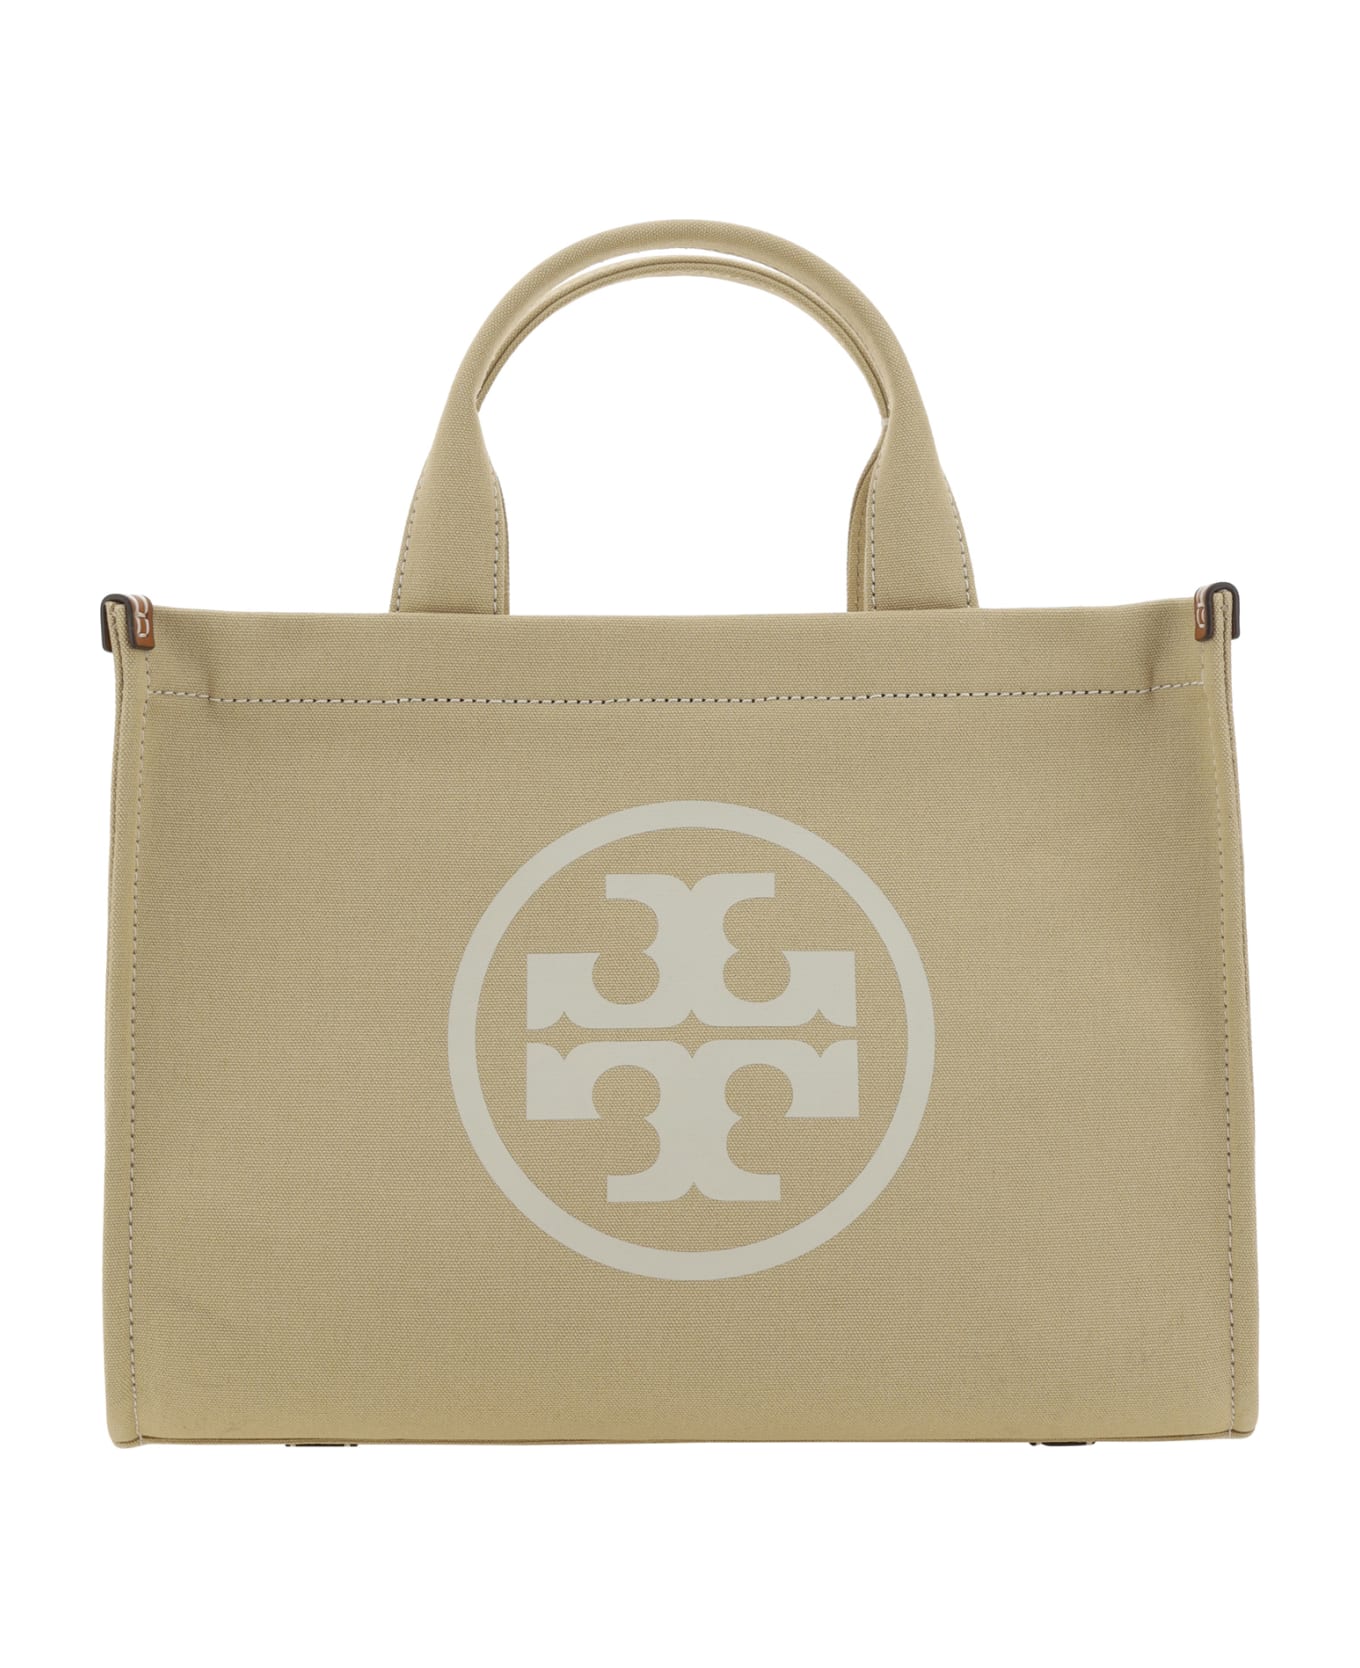 Tory Burch Tote - Hickory トートバッグ